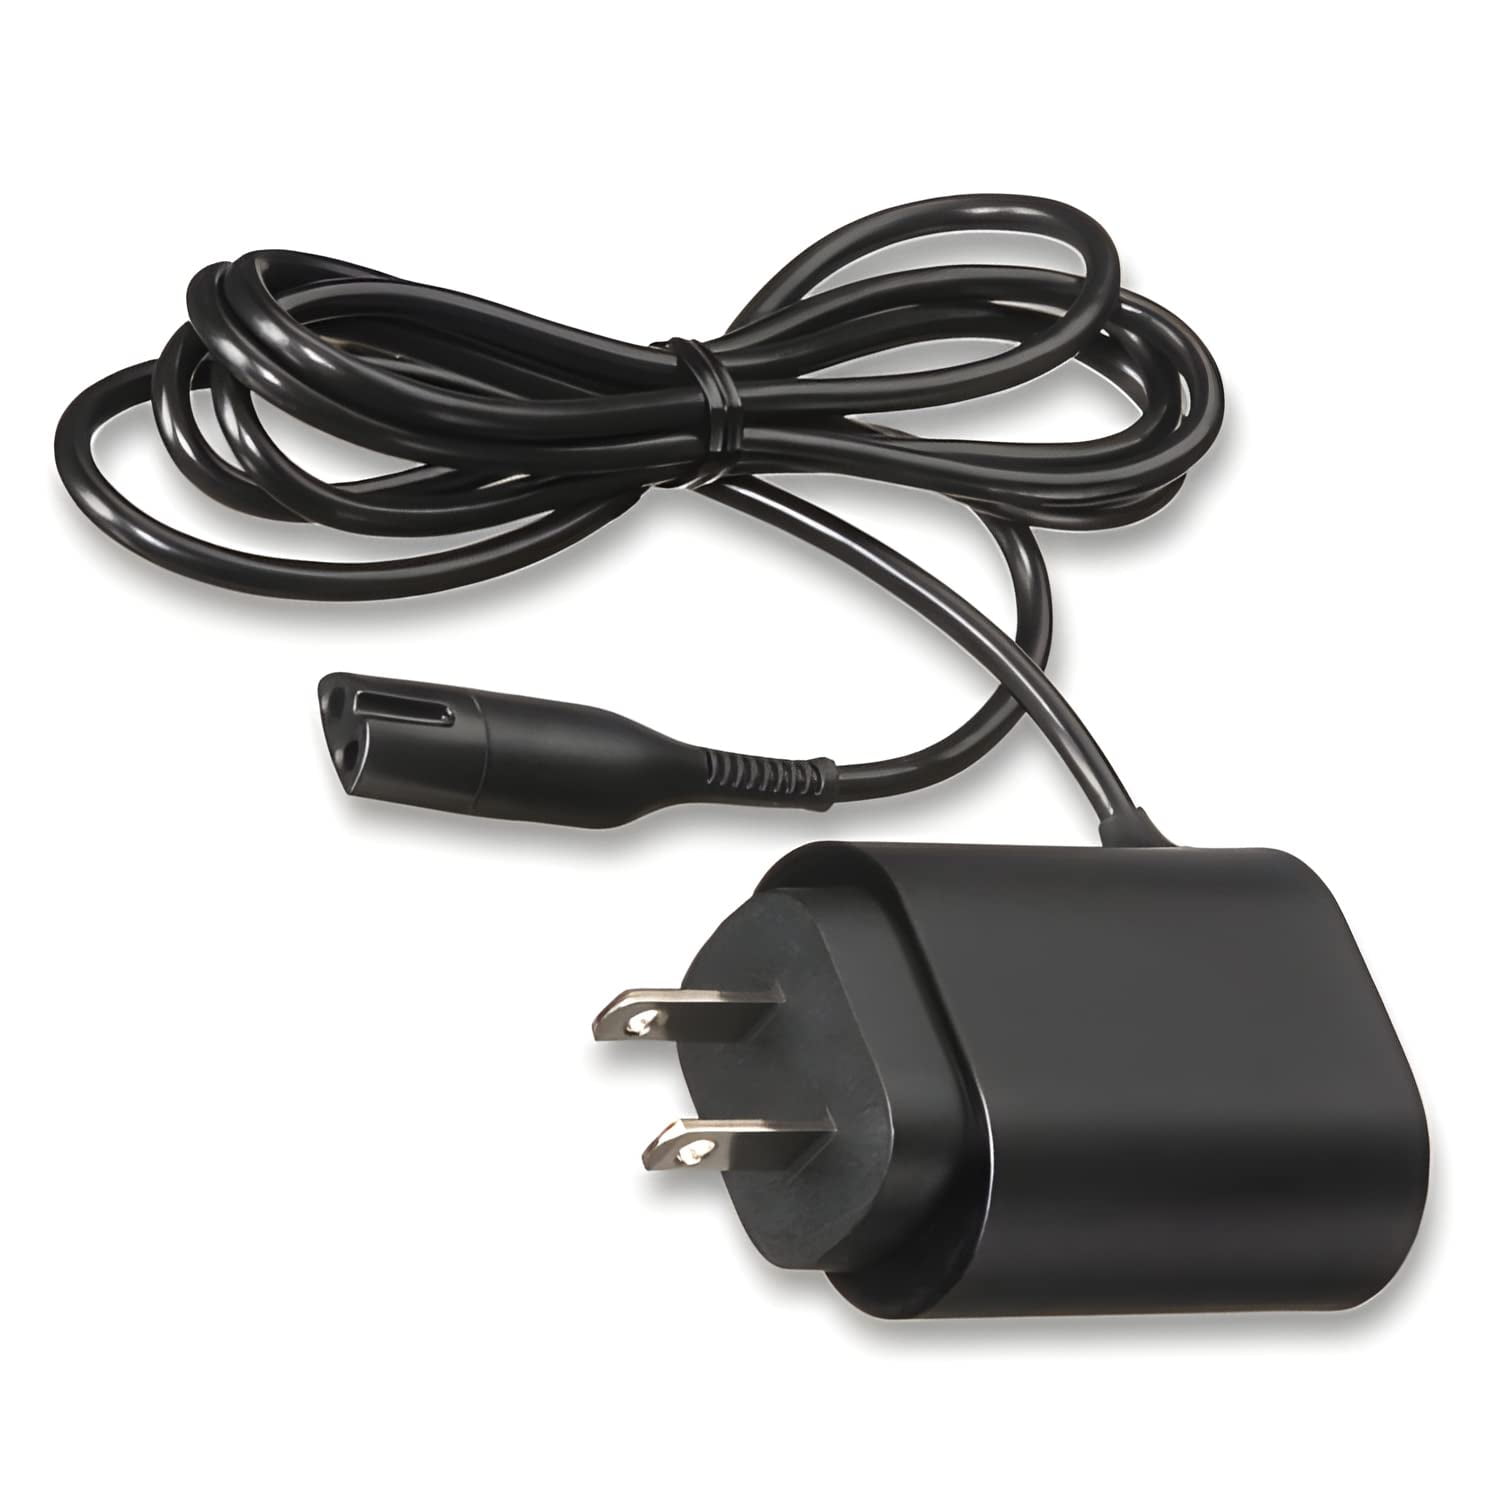 Braun - Replacement Wall Charger for Braun Shavers Series 1 3 5 7